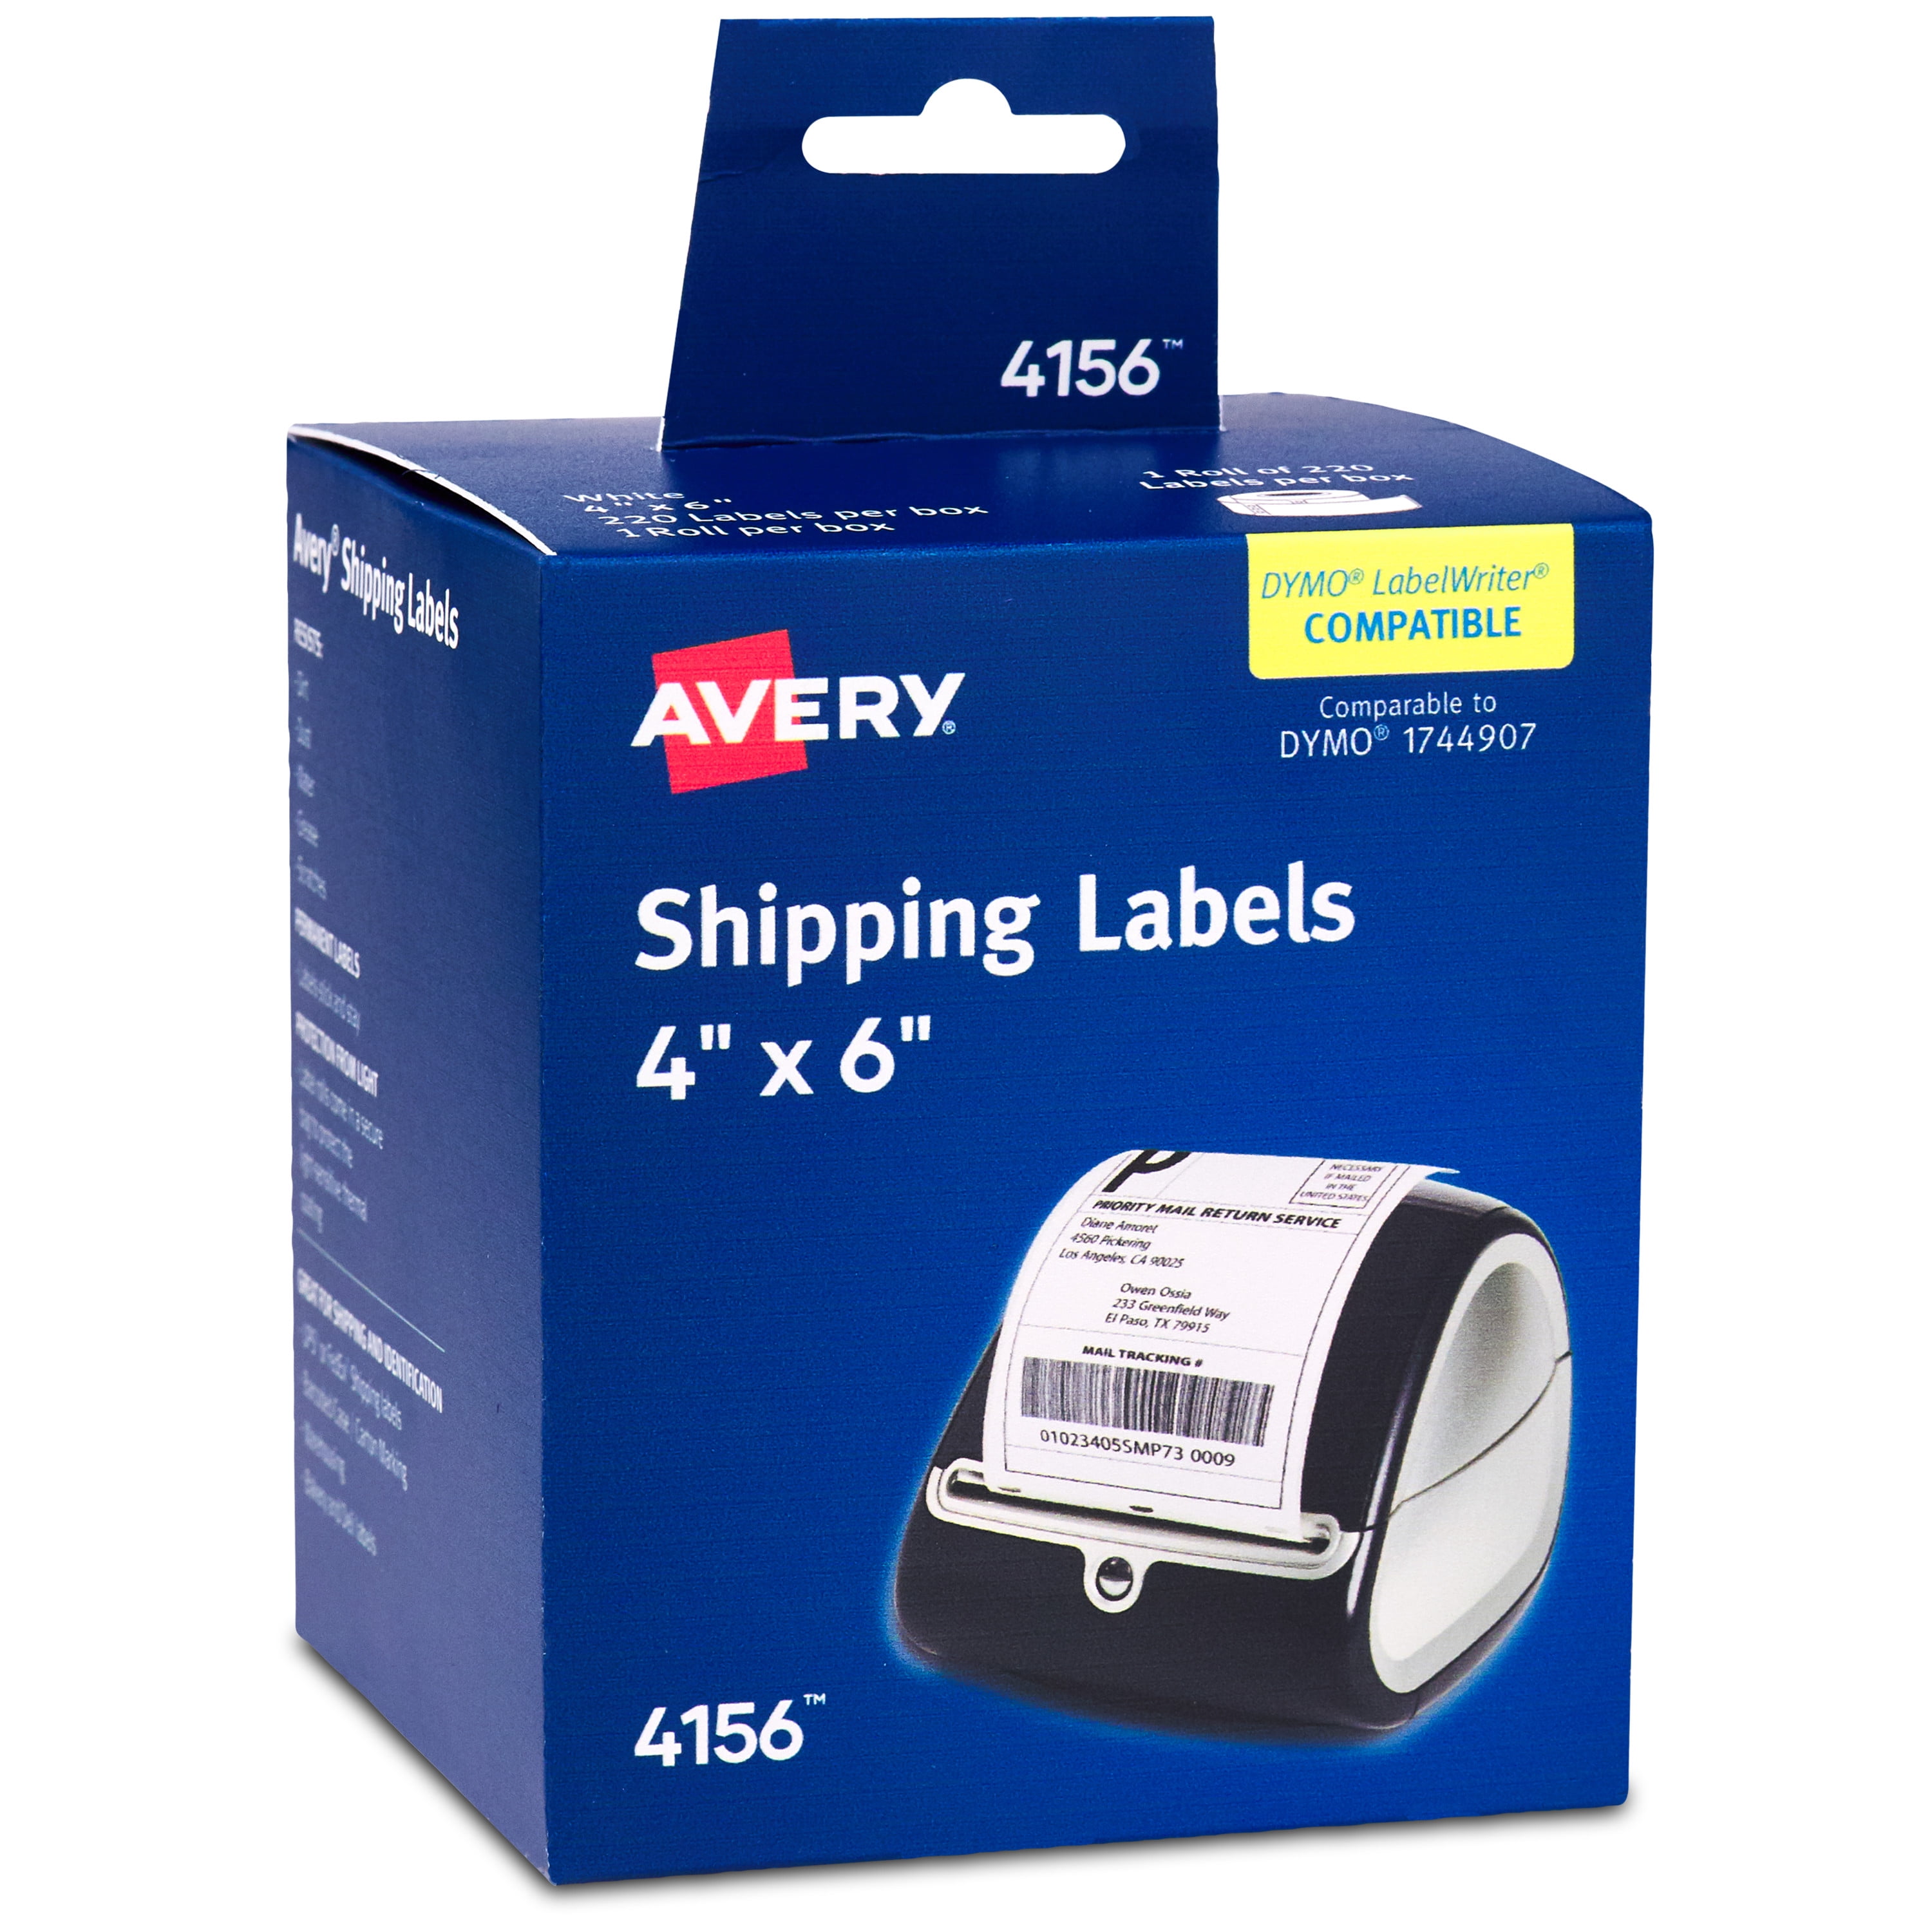 250 Labels 1 Roll 4"X6" Inch Direct Thermal Self Adhesive Printer Label 4 x 6 